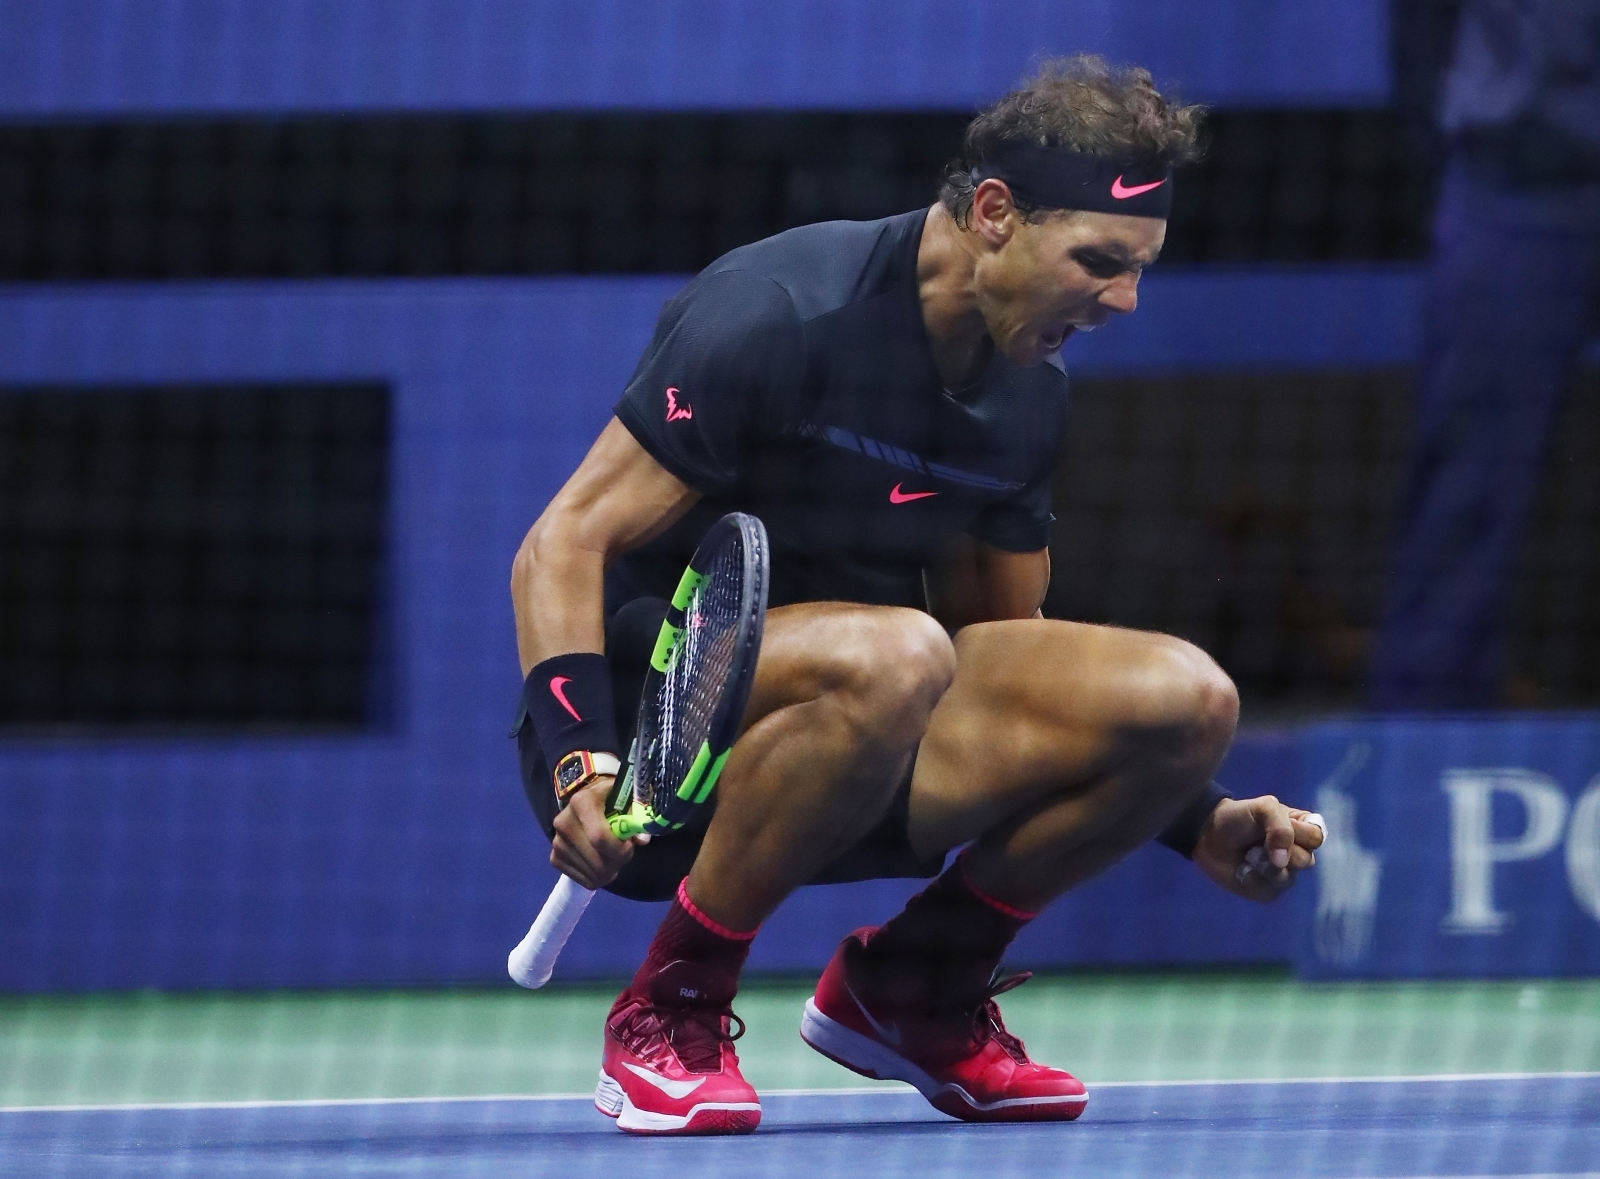 Rafael Nadal wins 16th Grand Slam title after dominating Kevin Anderson